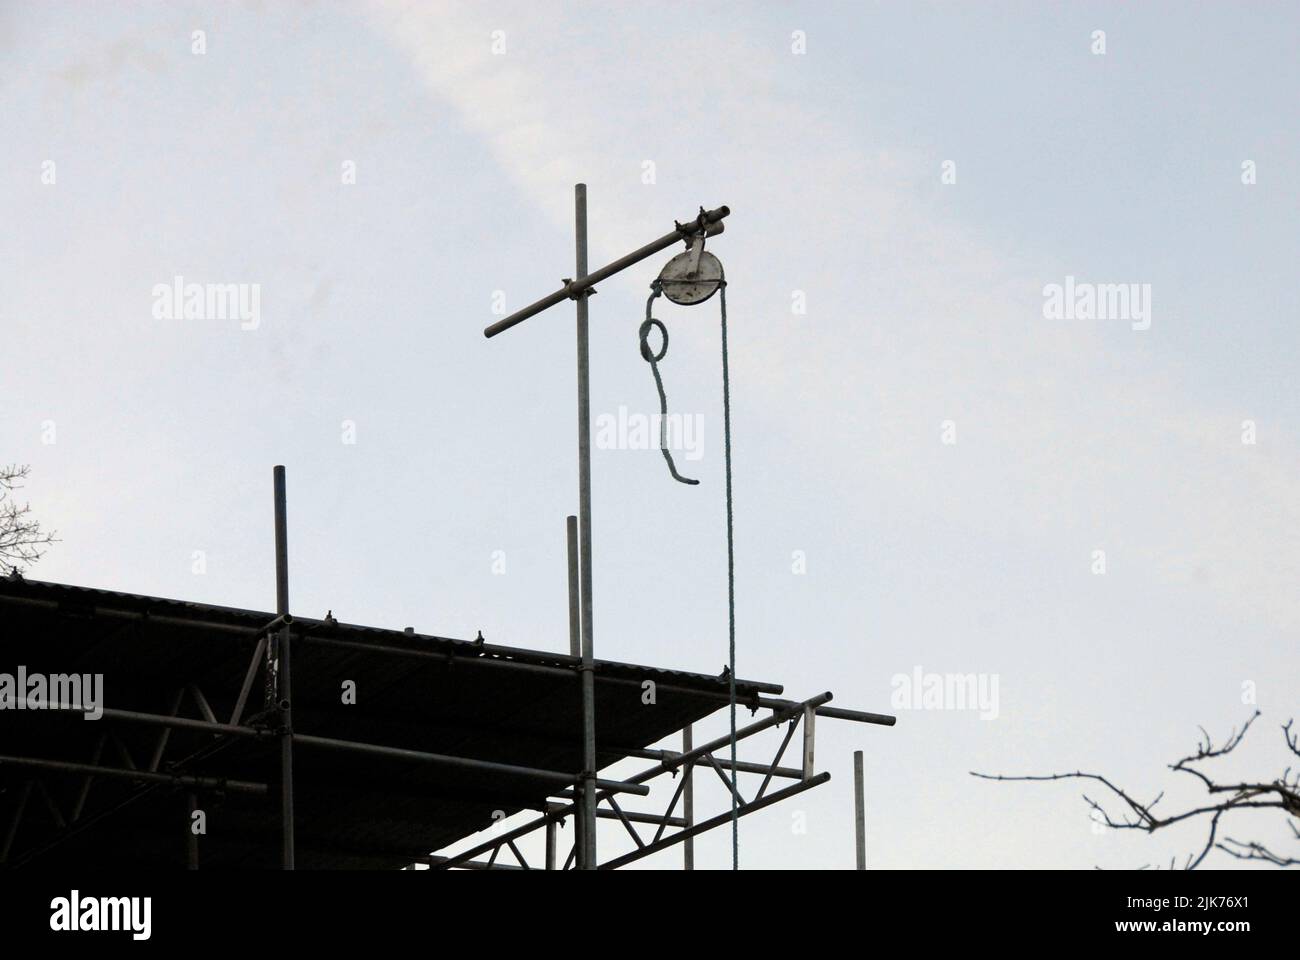 Pulley on scaffolding above new house construction to enable material to be raised and lowered  more easily, with knot tied in rope to prevent loss Stock Photo